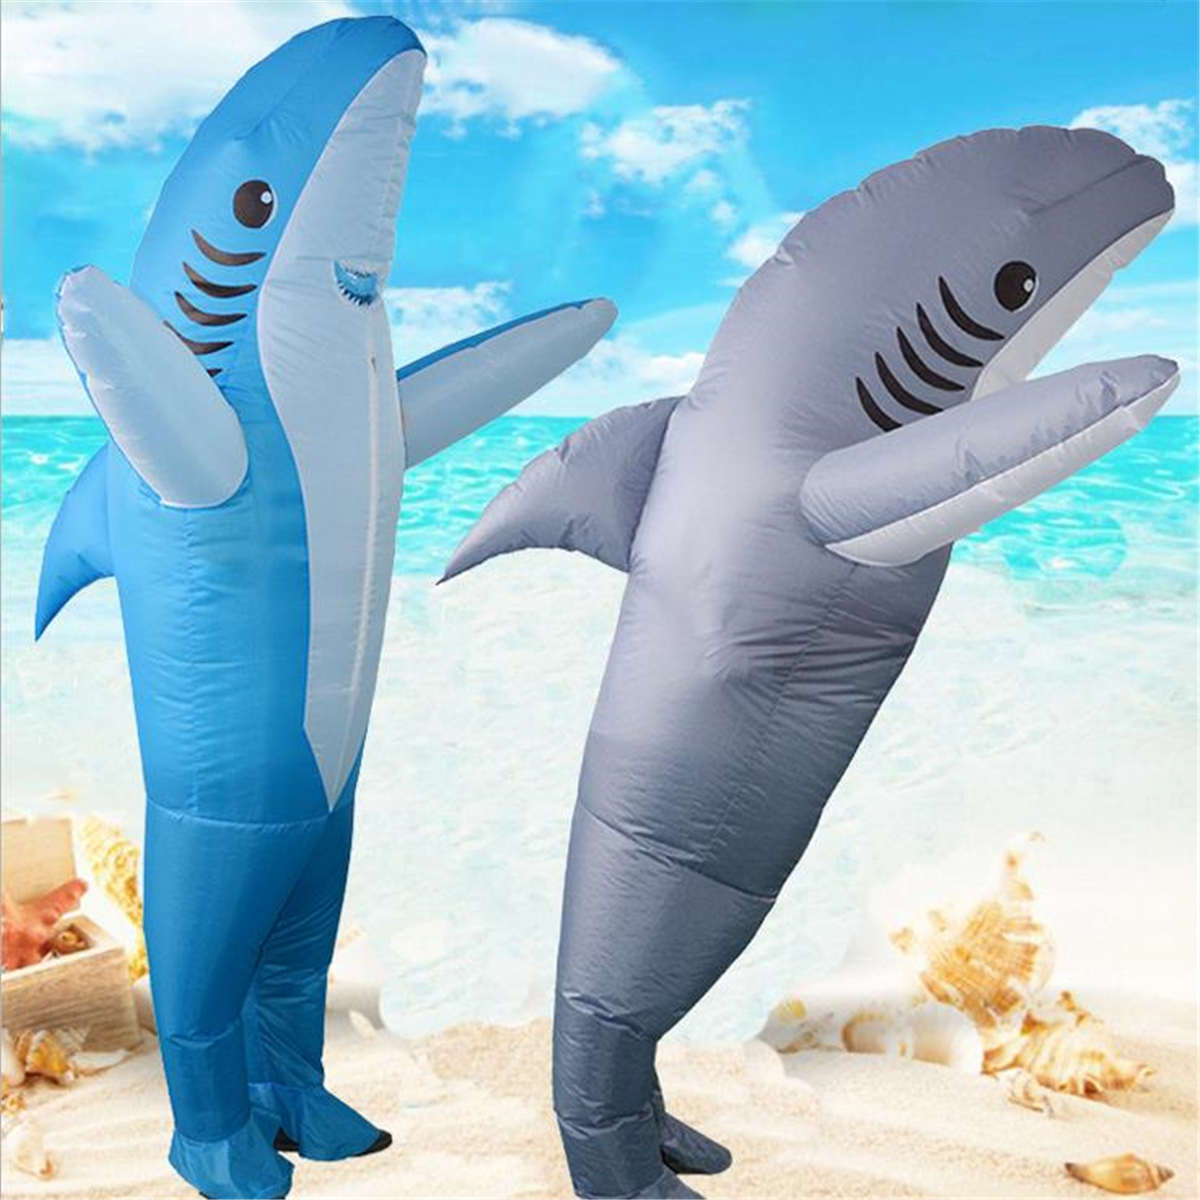 Inflatable Costumes Shark Adult Halloween Fancy Dress Funny Scary Dress Costume 15